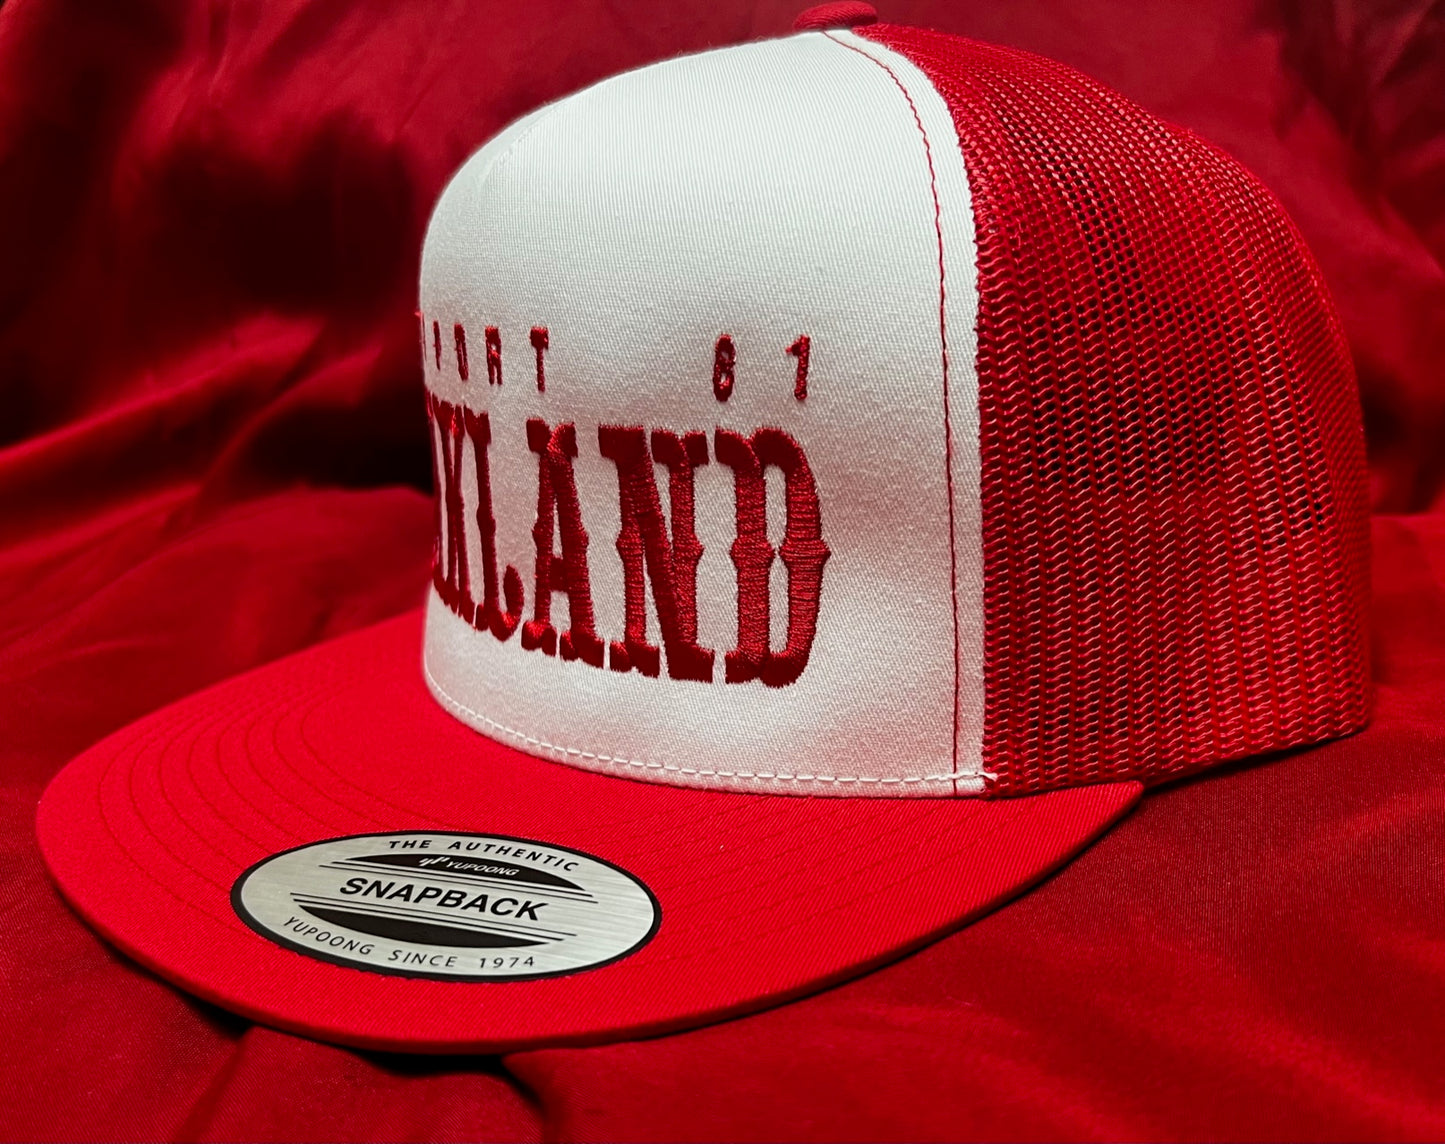 2 OF COLORS Support 81 Oakland Mesh Hat